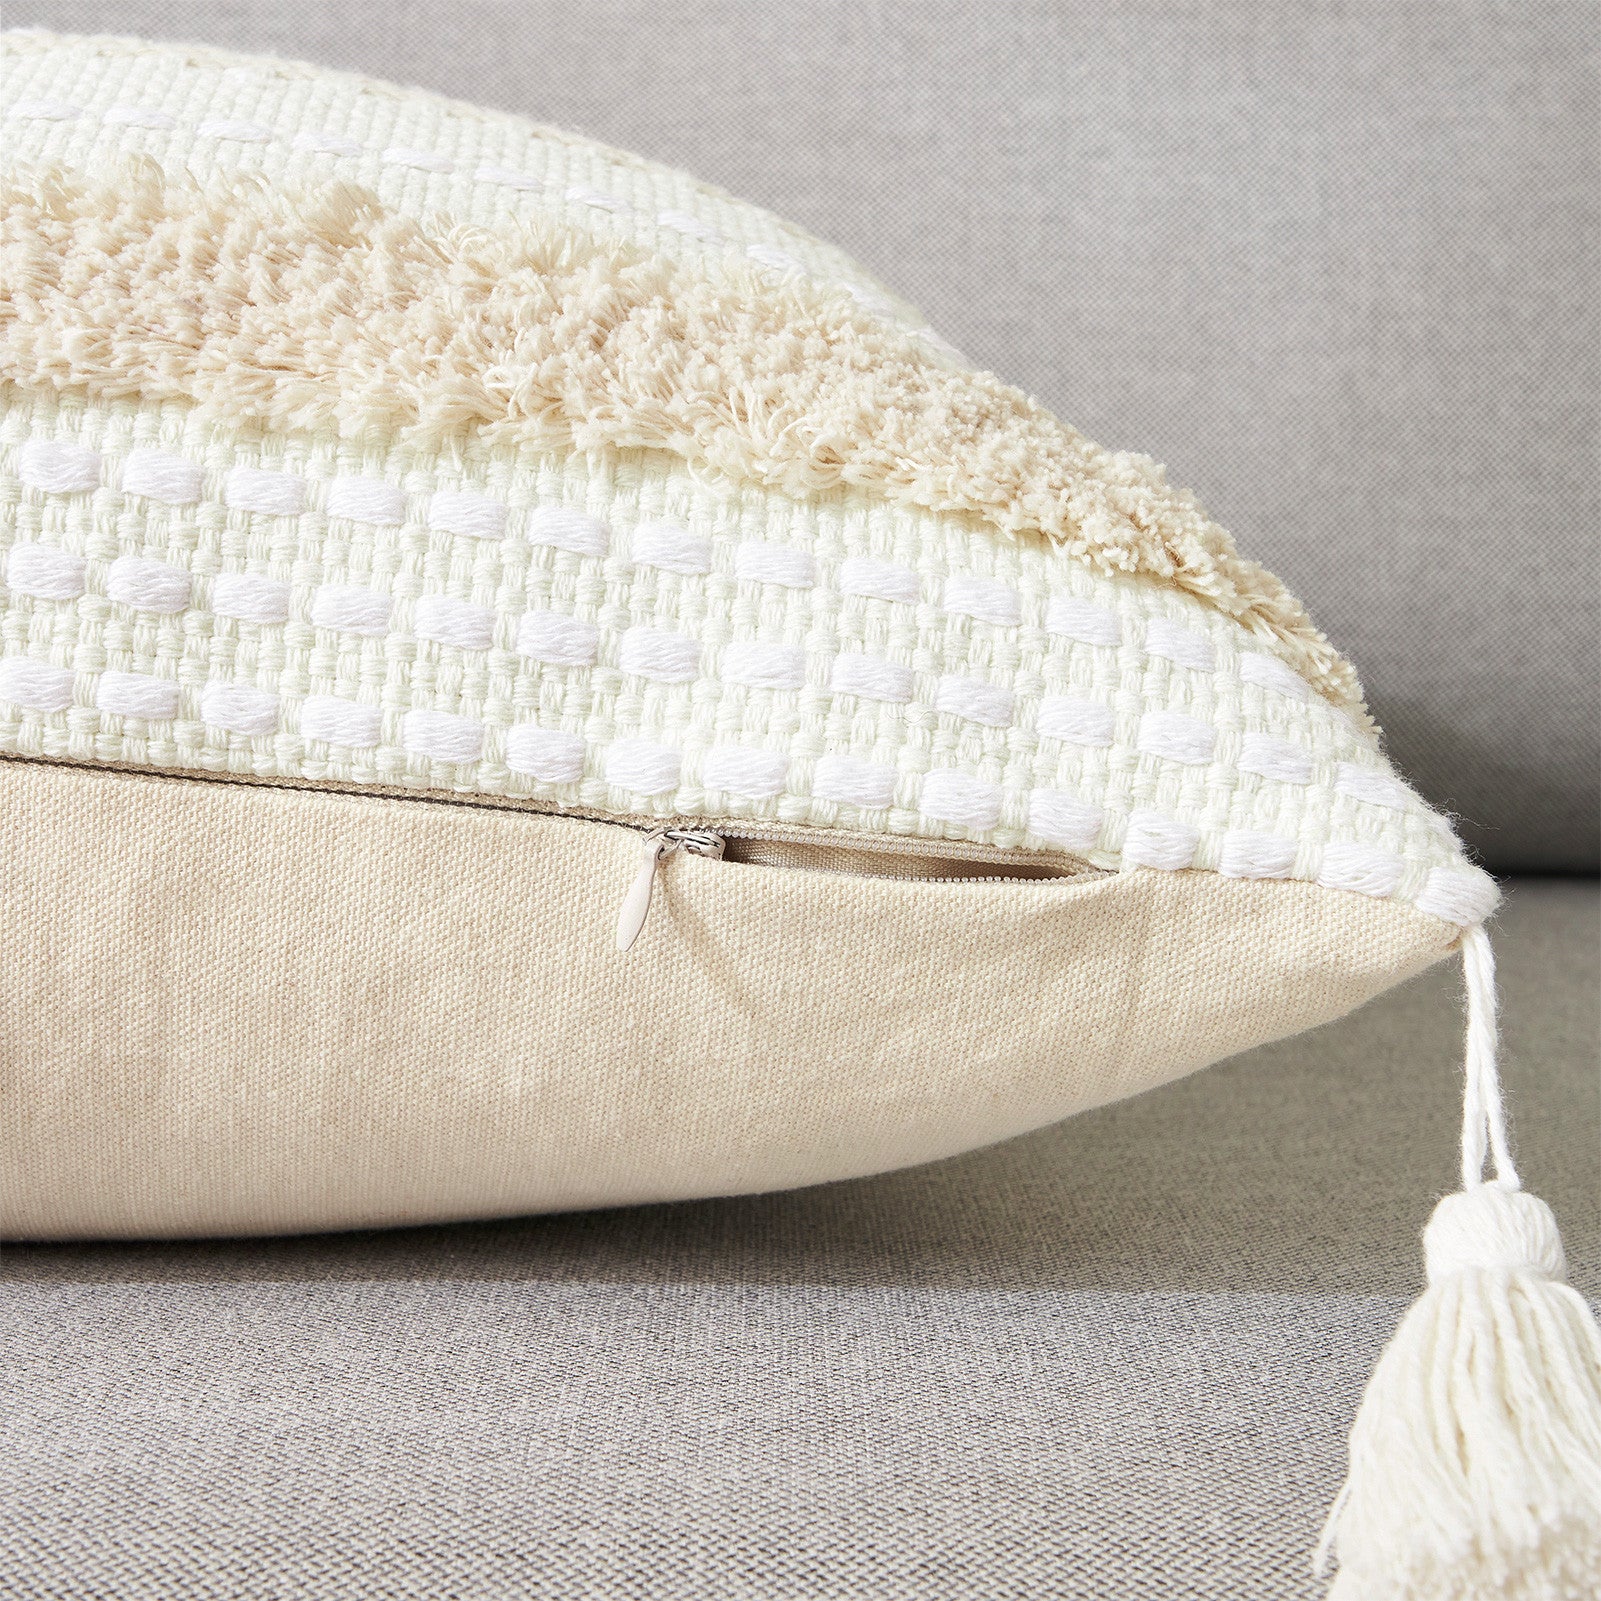 COTTON LINEN Cushion Cover With Tassels